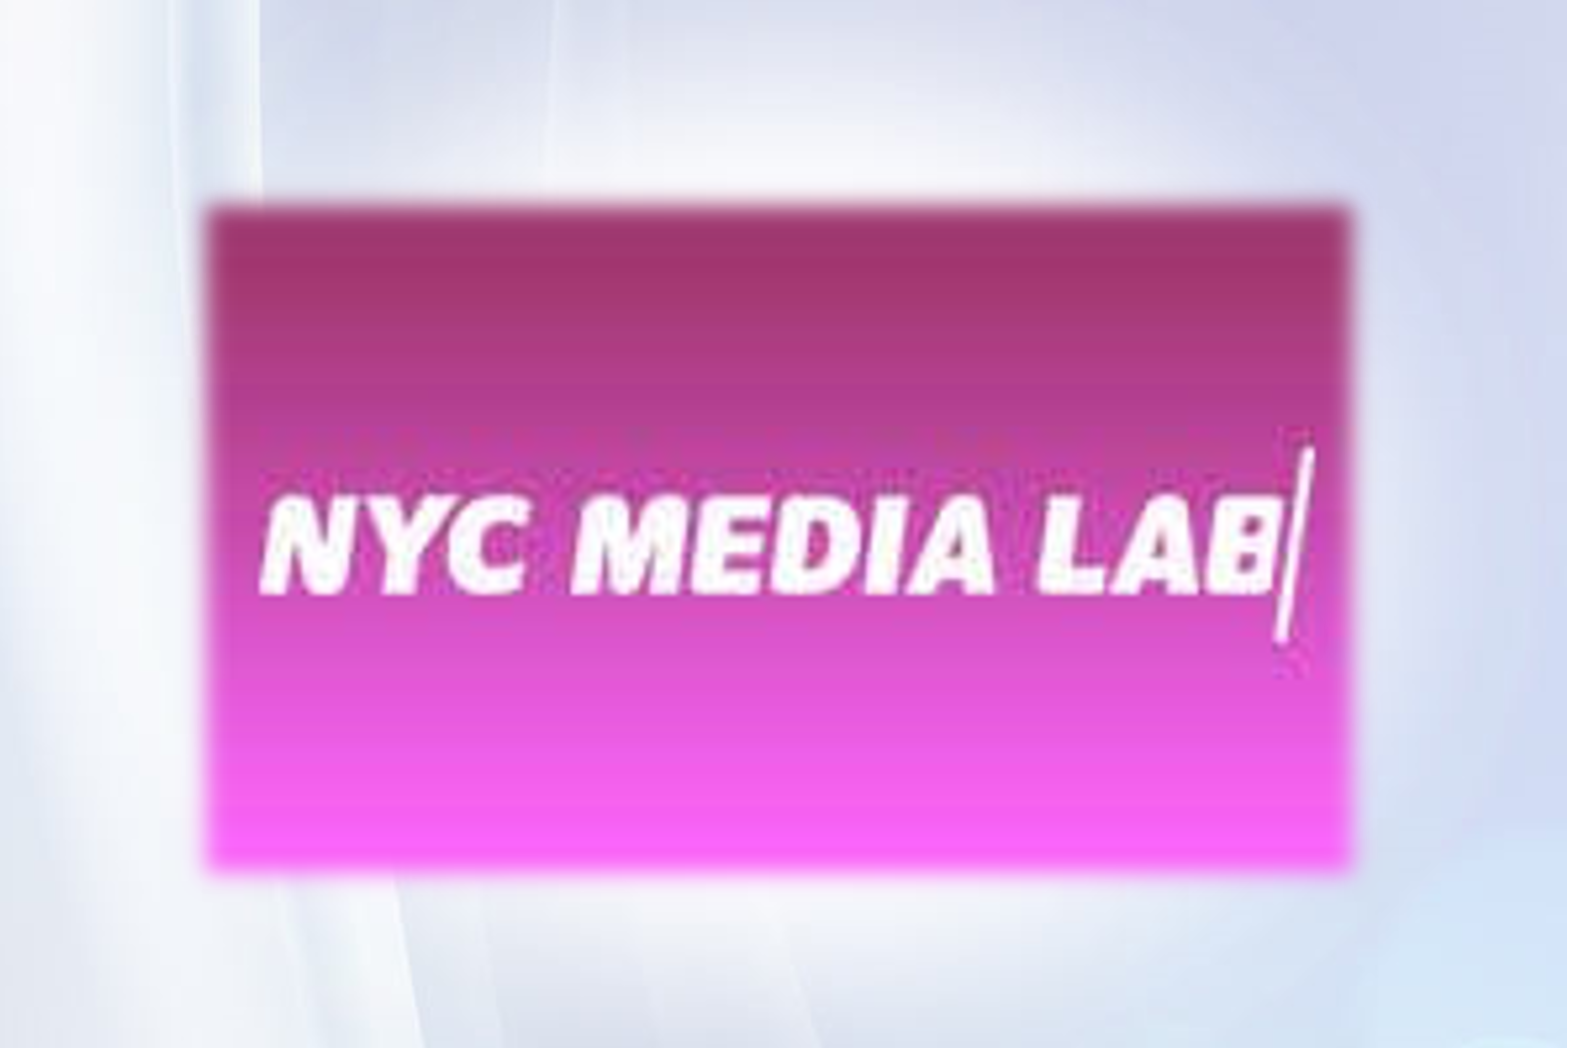 FlexICoN demo wins Creative Technology Award from NYC Media Lab – CoSMIC